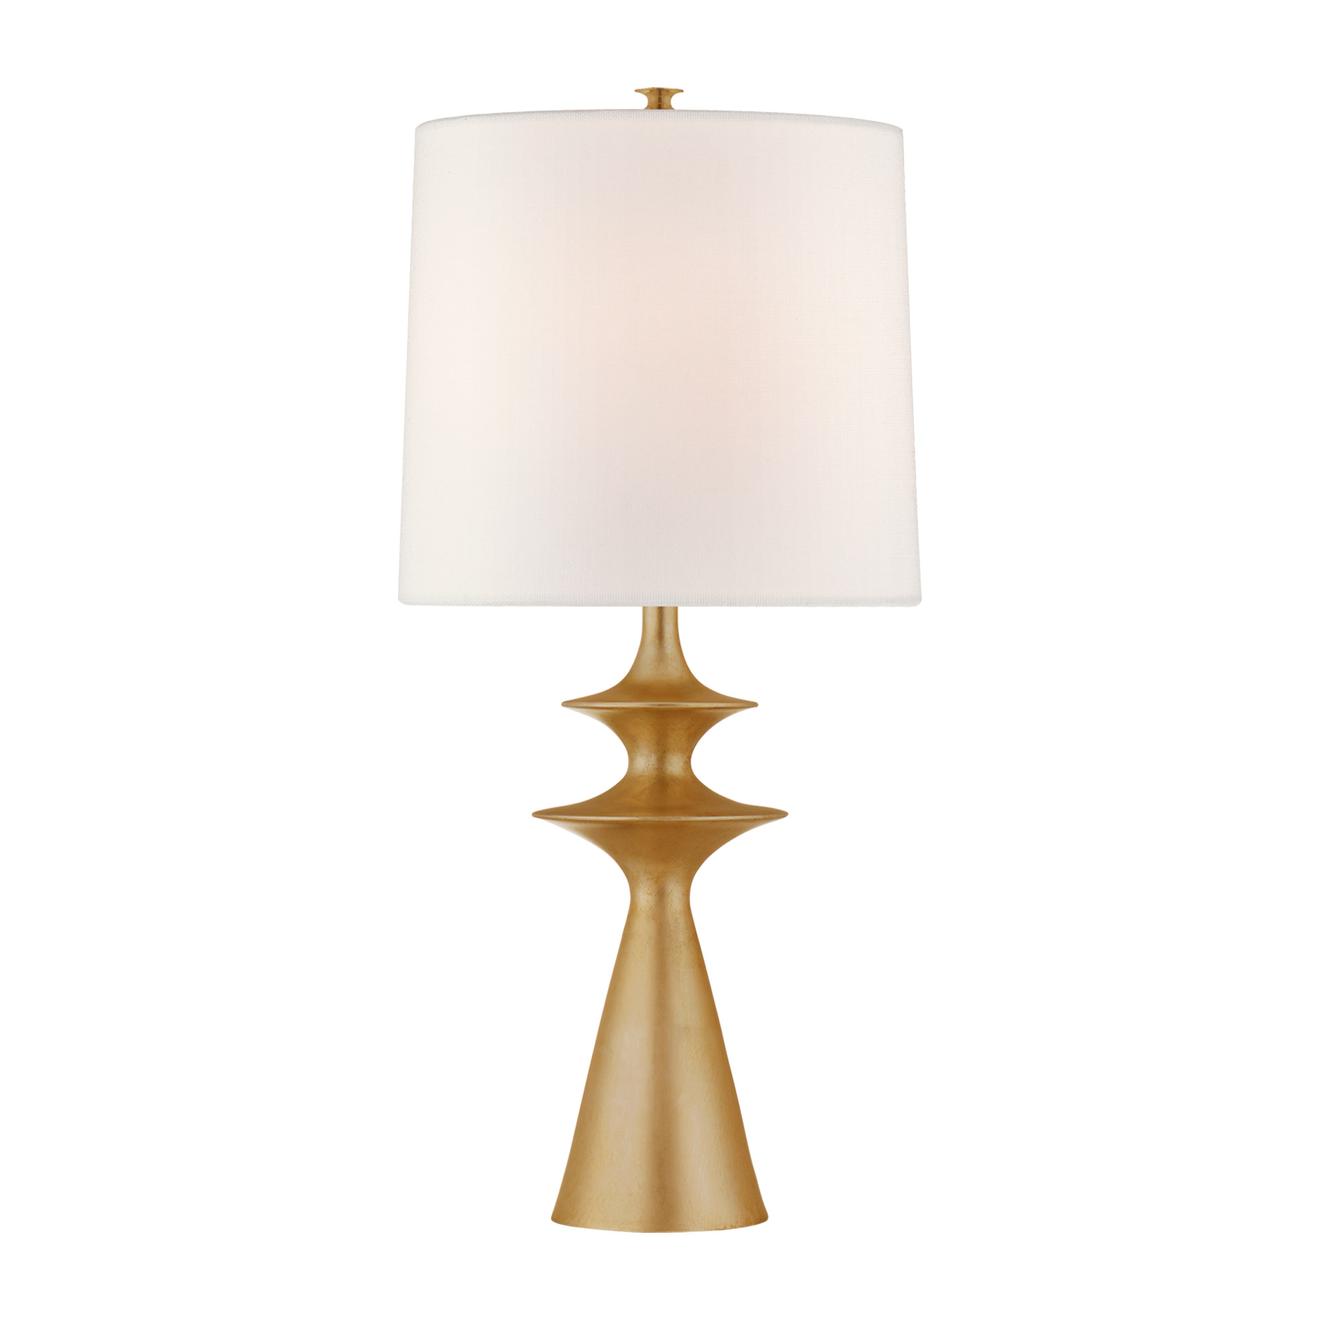 Lakmos Large Table Lamp offers in Bloomingdales